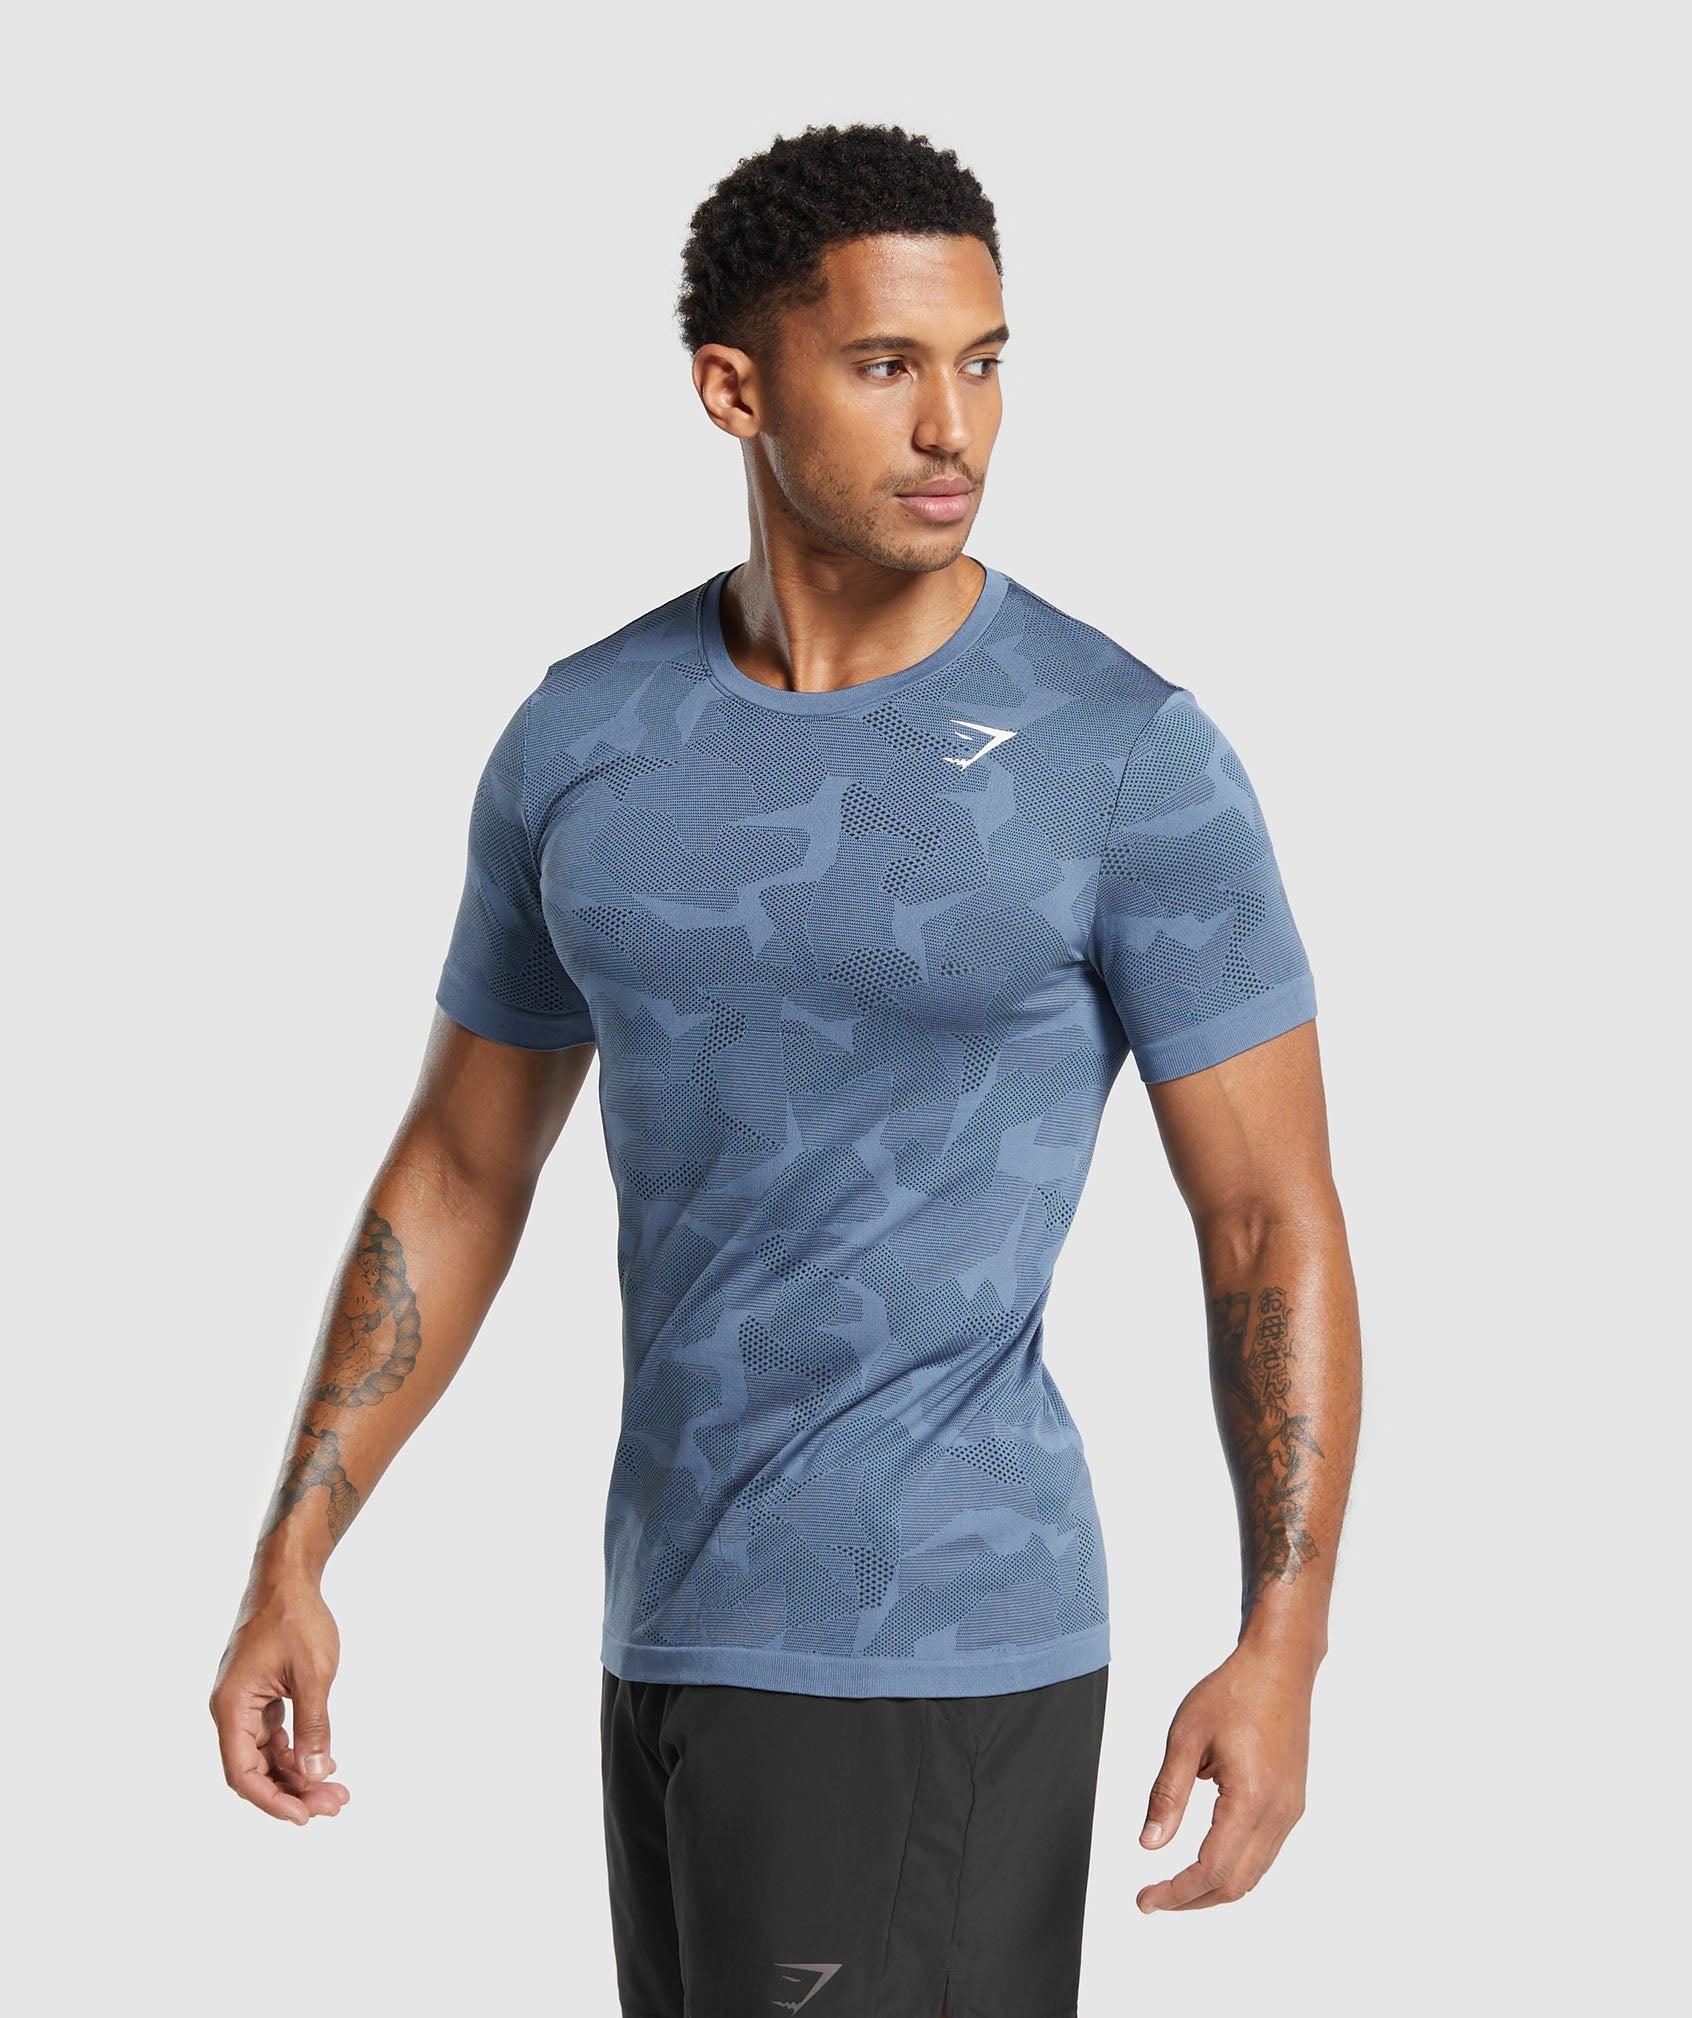 Sport Seamless T-Shirt in Faded Blue/Black - view 3